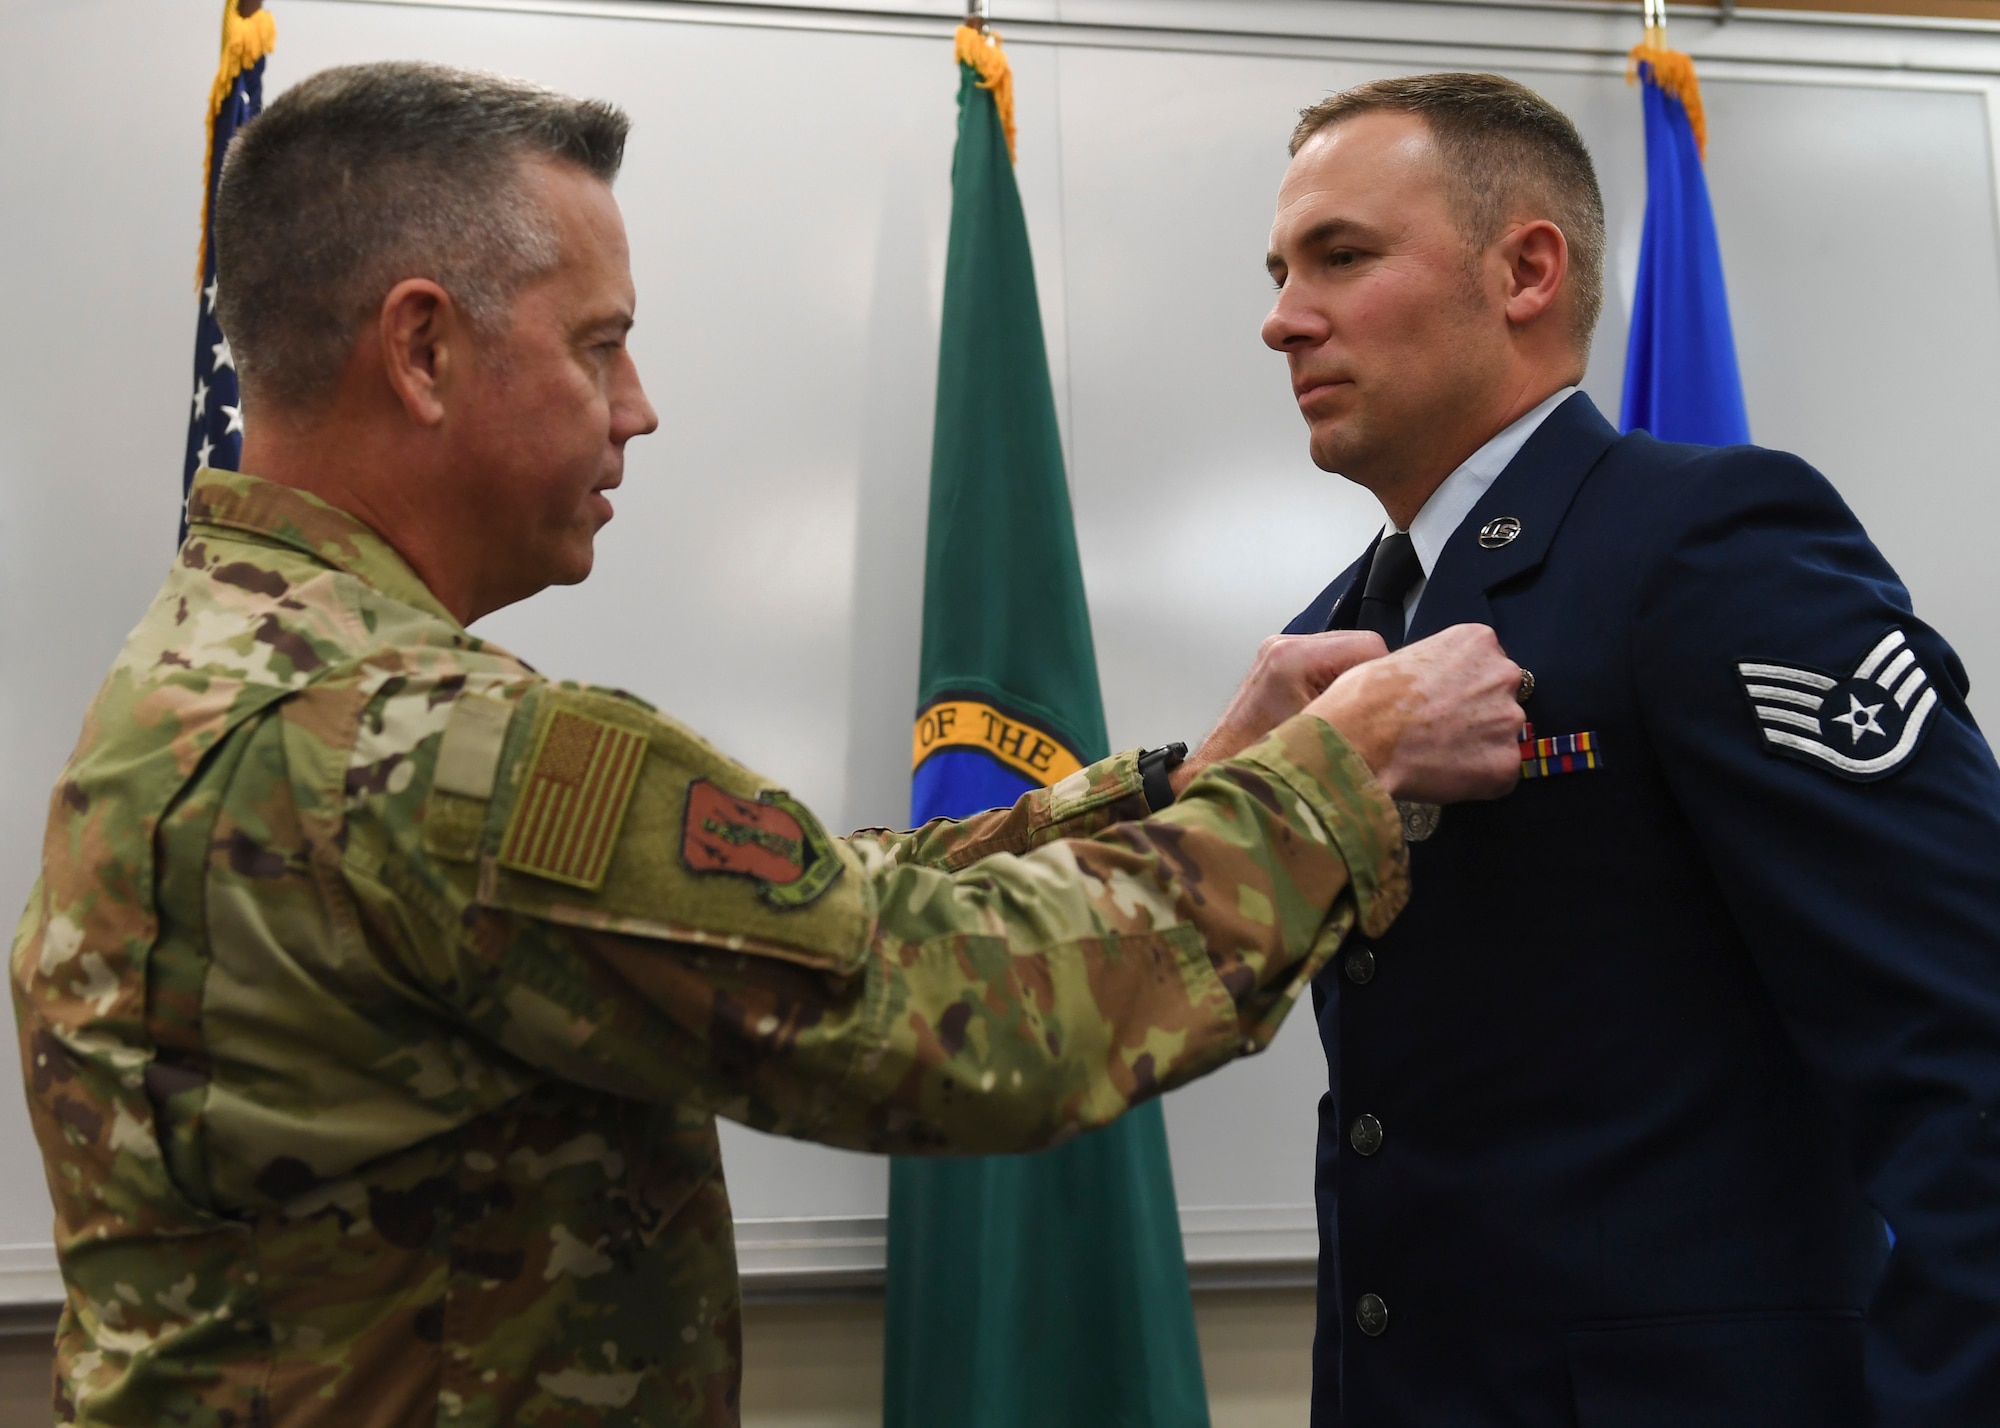 Brig. General Jeremy Horn, Washington Air National Guard commander, pins the Washington State Guardsman Medal on Staff Sgt. Jonathan Tinsley, 116th Air Support Operations Squadron Tactical Air Control Party, Nov. 2, 2019, at Camp Murray, Washington. Tinsley received the medal for stopping an attacker from assaulting two people.